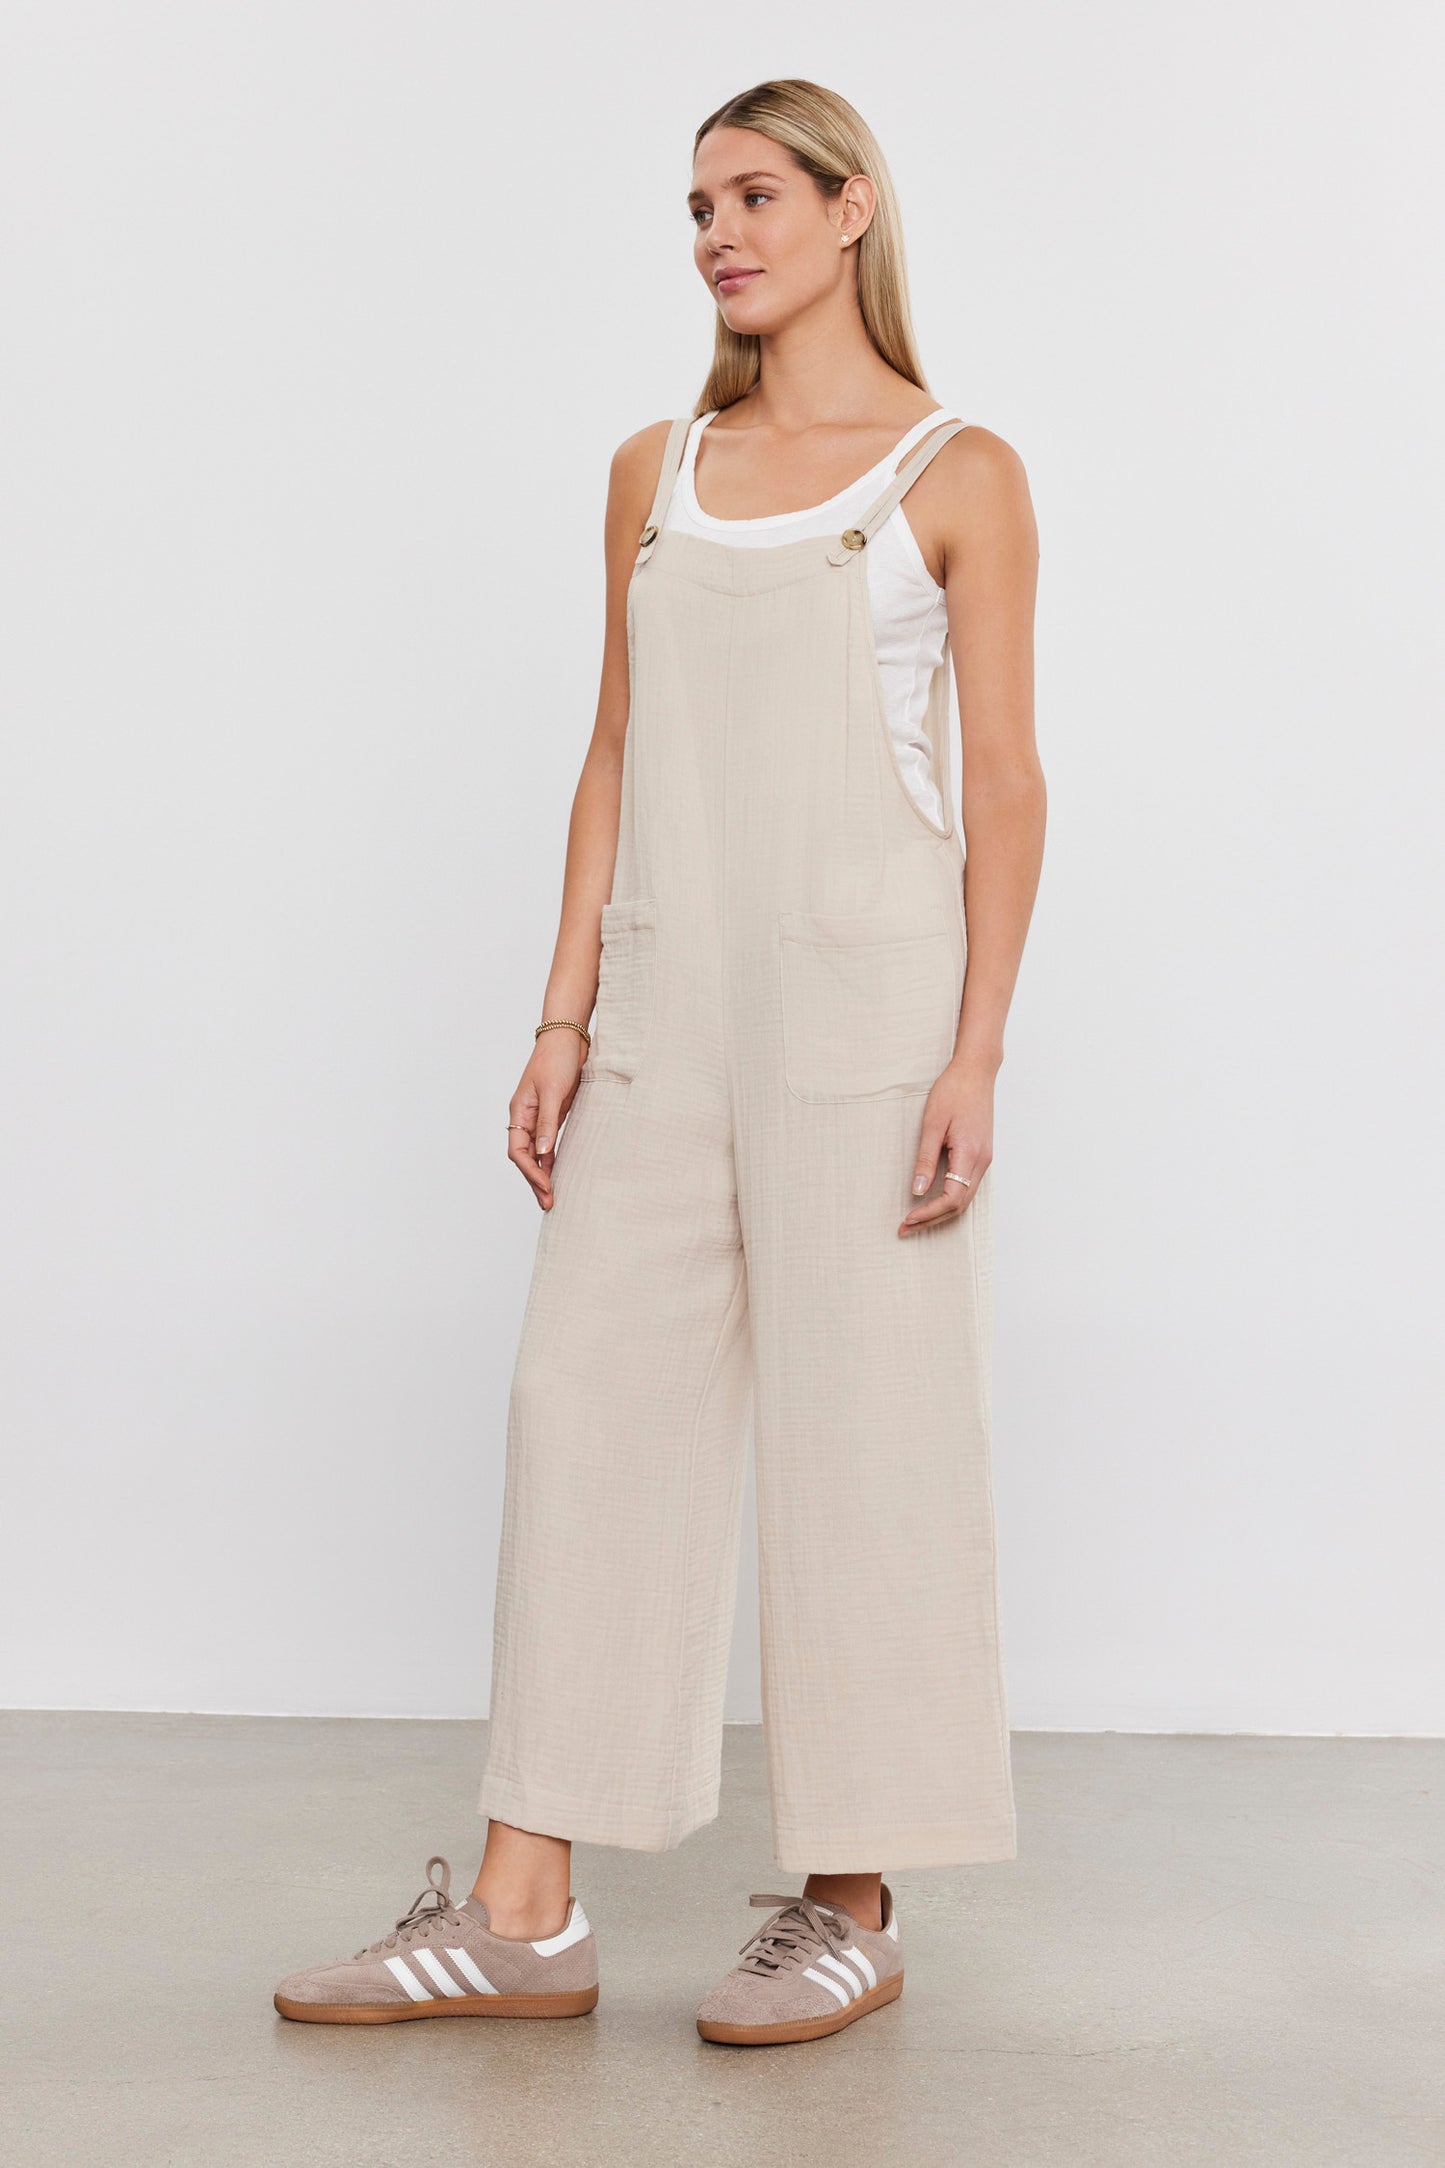 The EVERLEE Cotton Gauze Overall